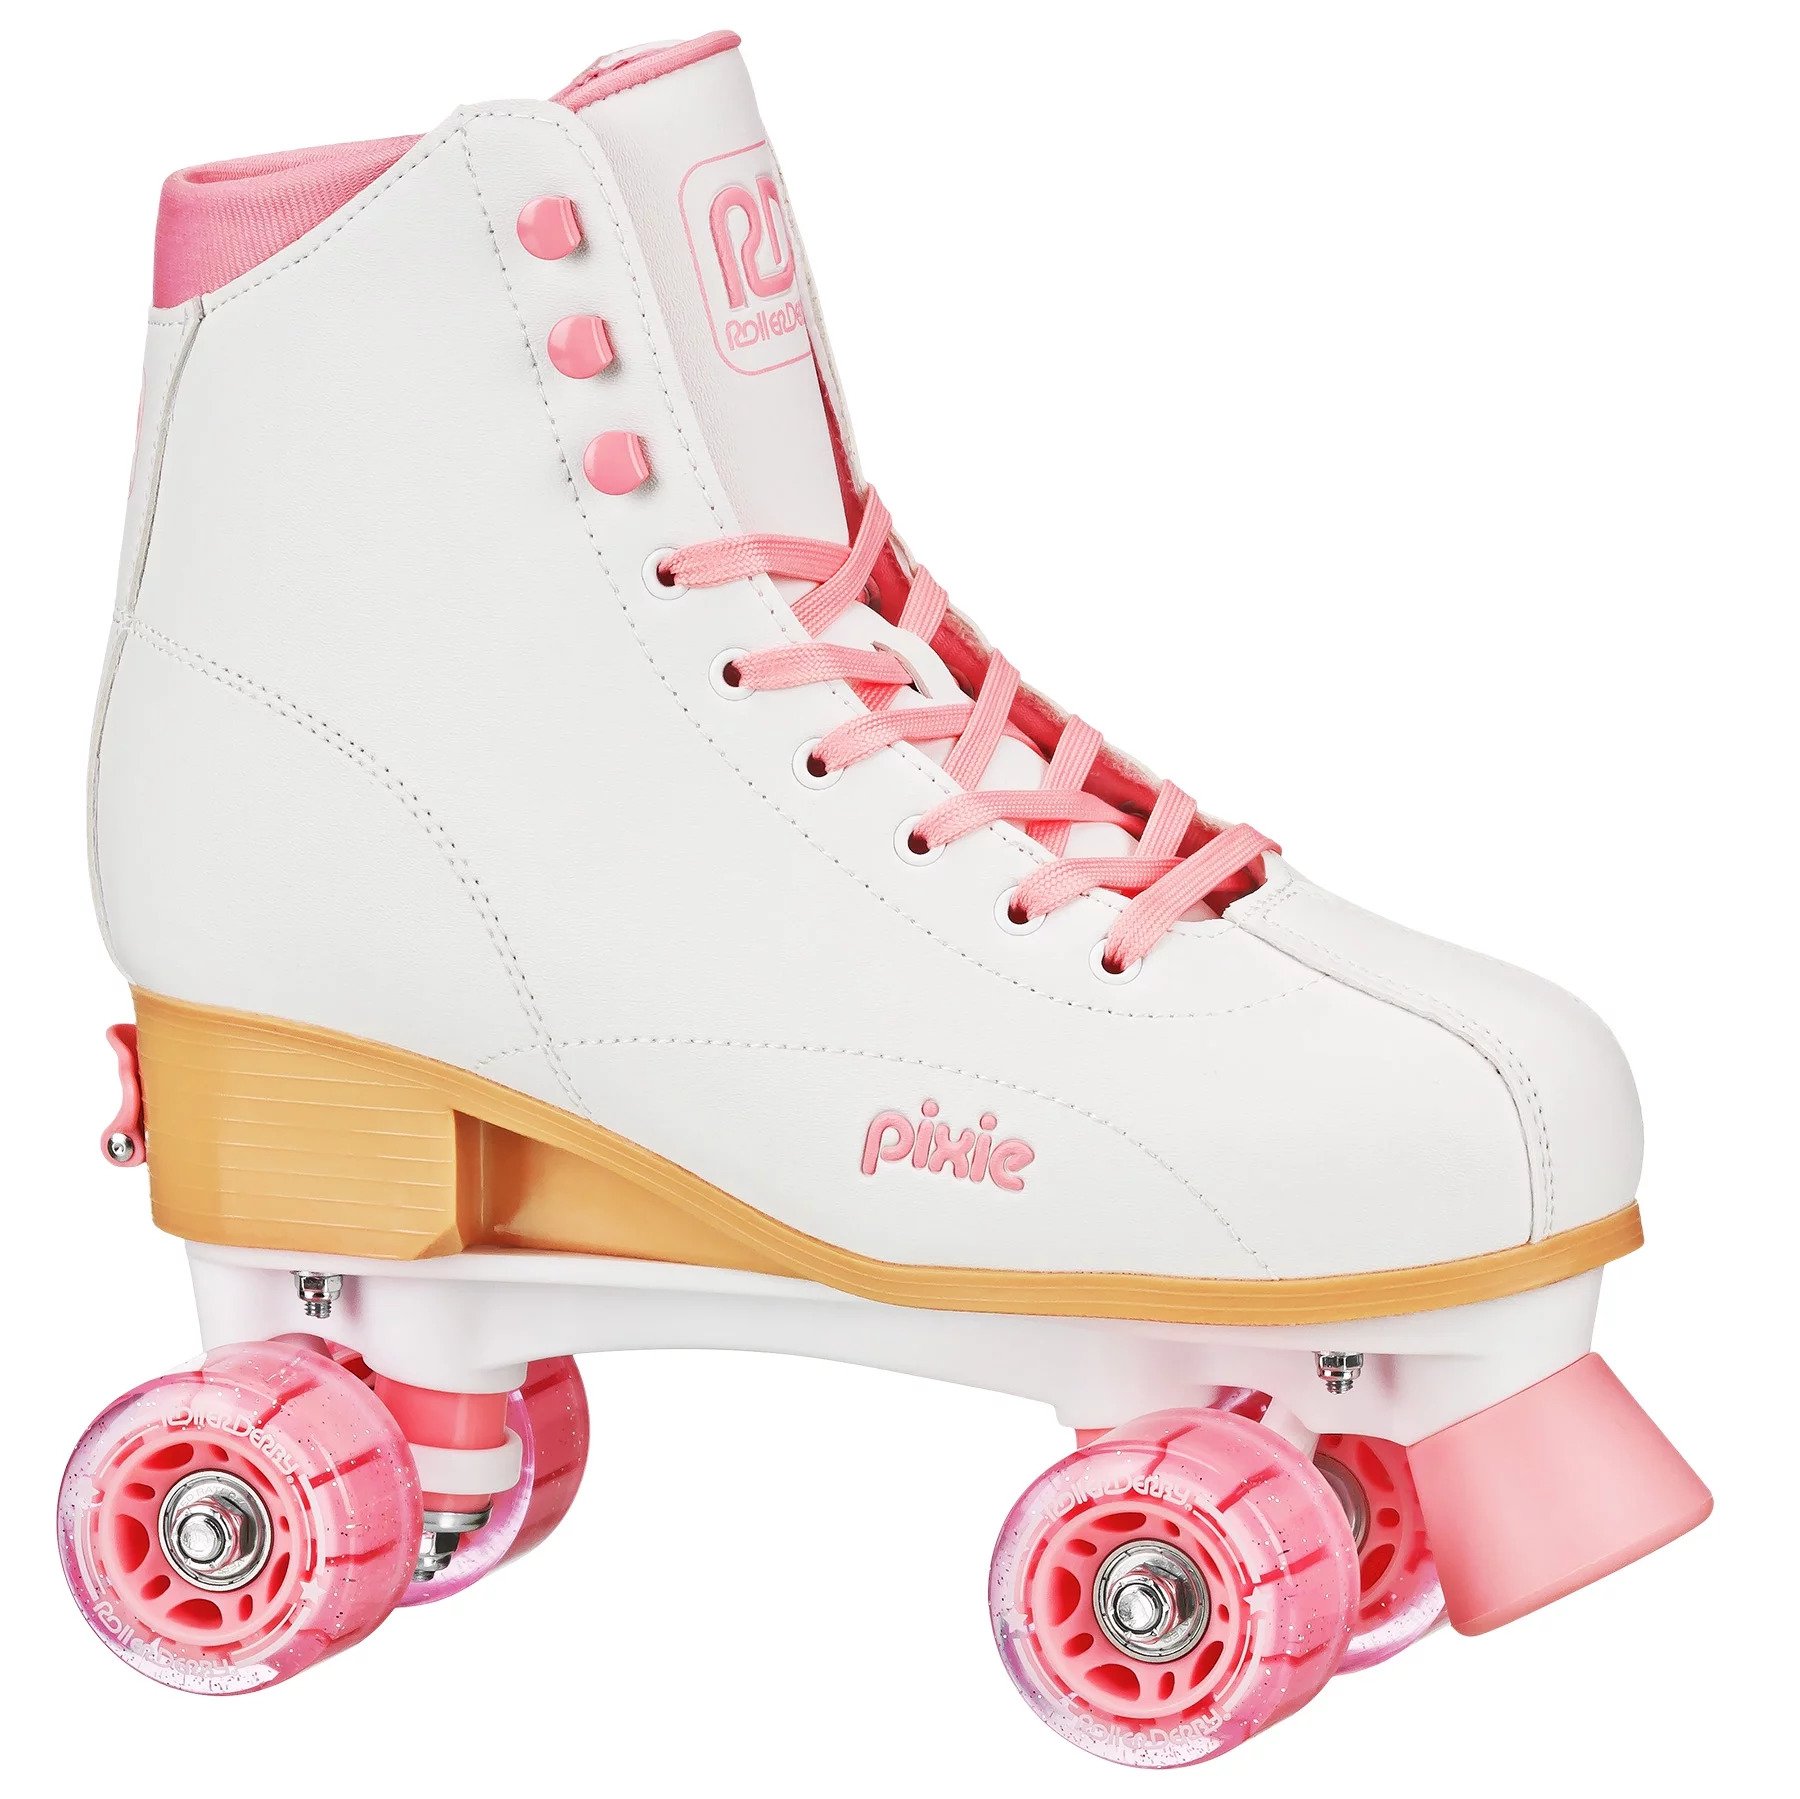 How To Store Roller Skates